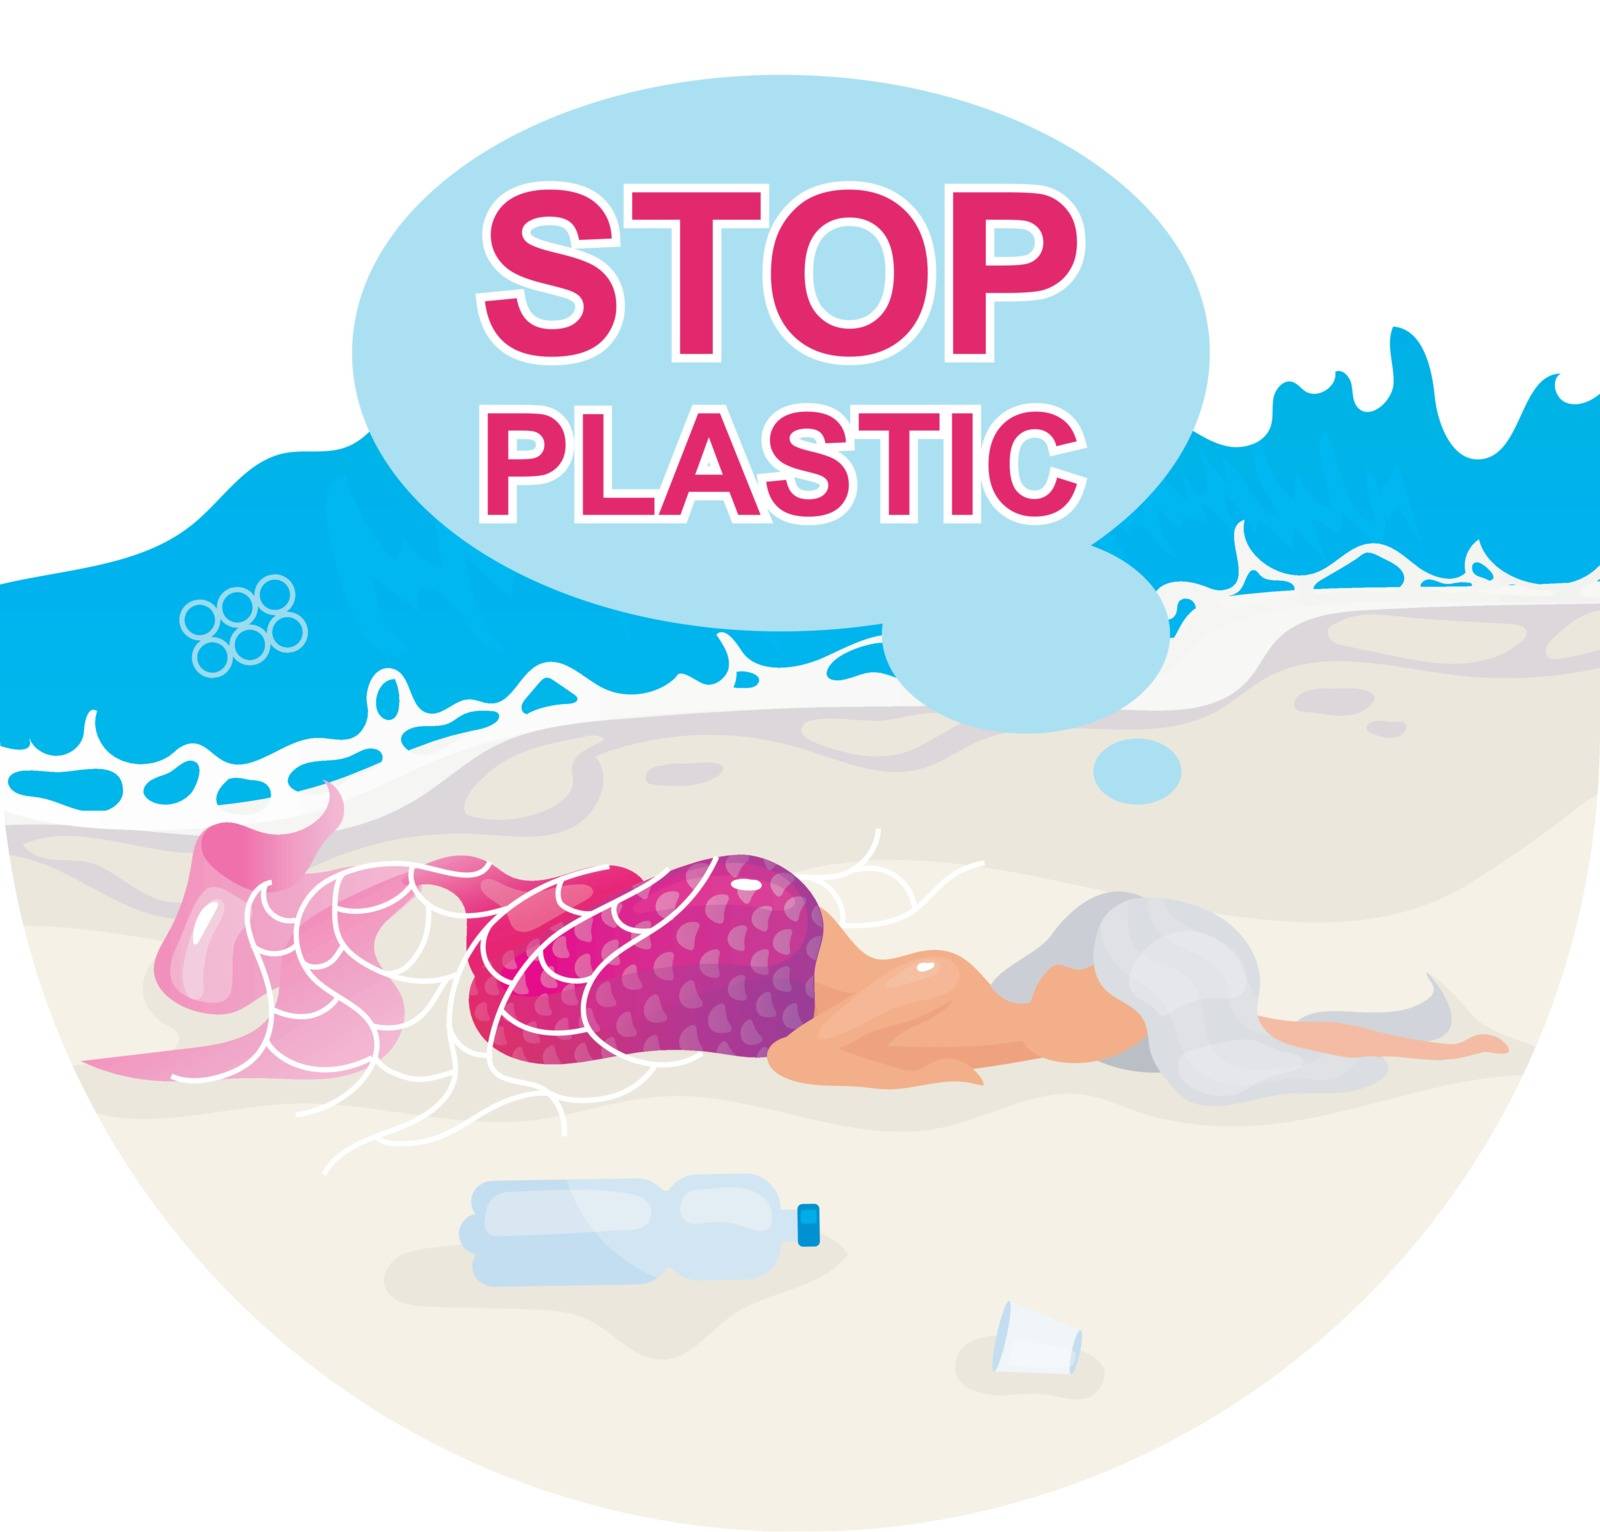 Stop plastic pollution in ocean flat concept icon. Mermaid trapped in fishnet. Dead fantasy creature on beach sticker, clipart. Nature damage. Isolated cartoon illustration on white background